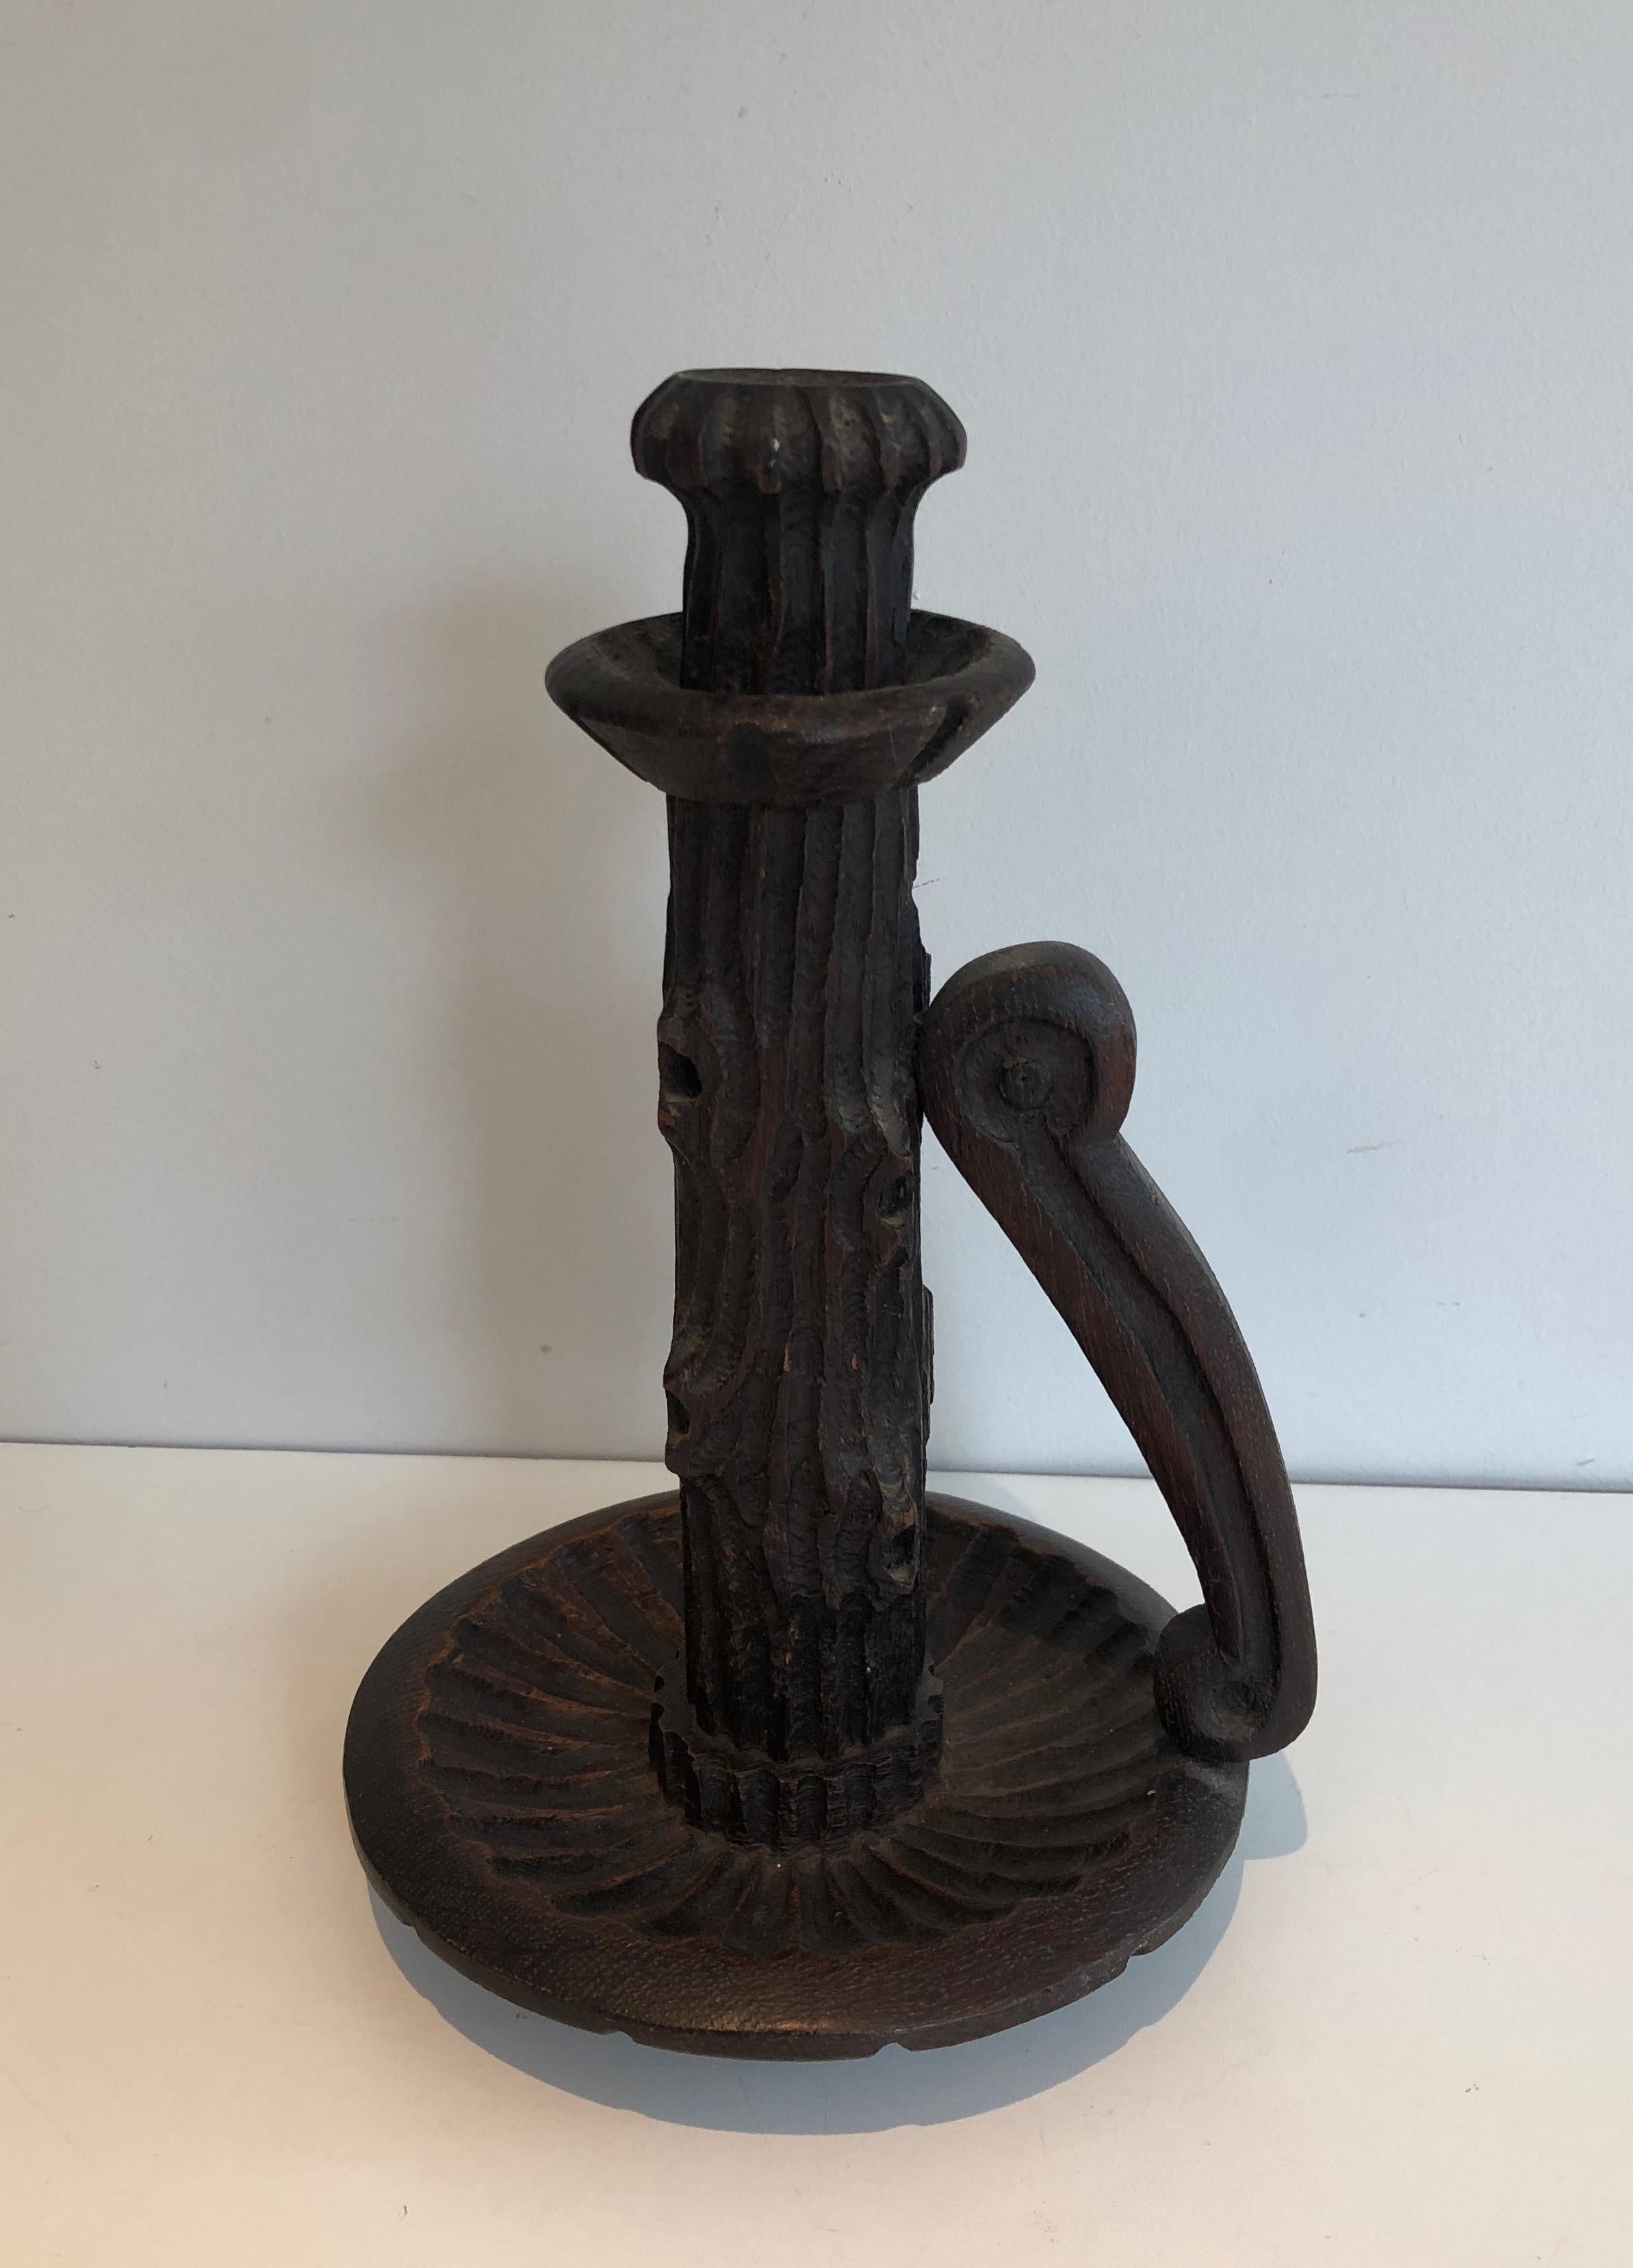 Pair of Tall Brutalist Candle Holders Made of Carved Wood, French, circa 1950 For Sale 10